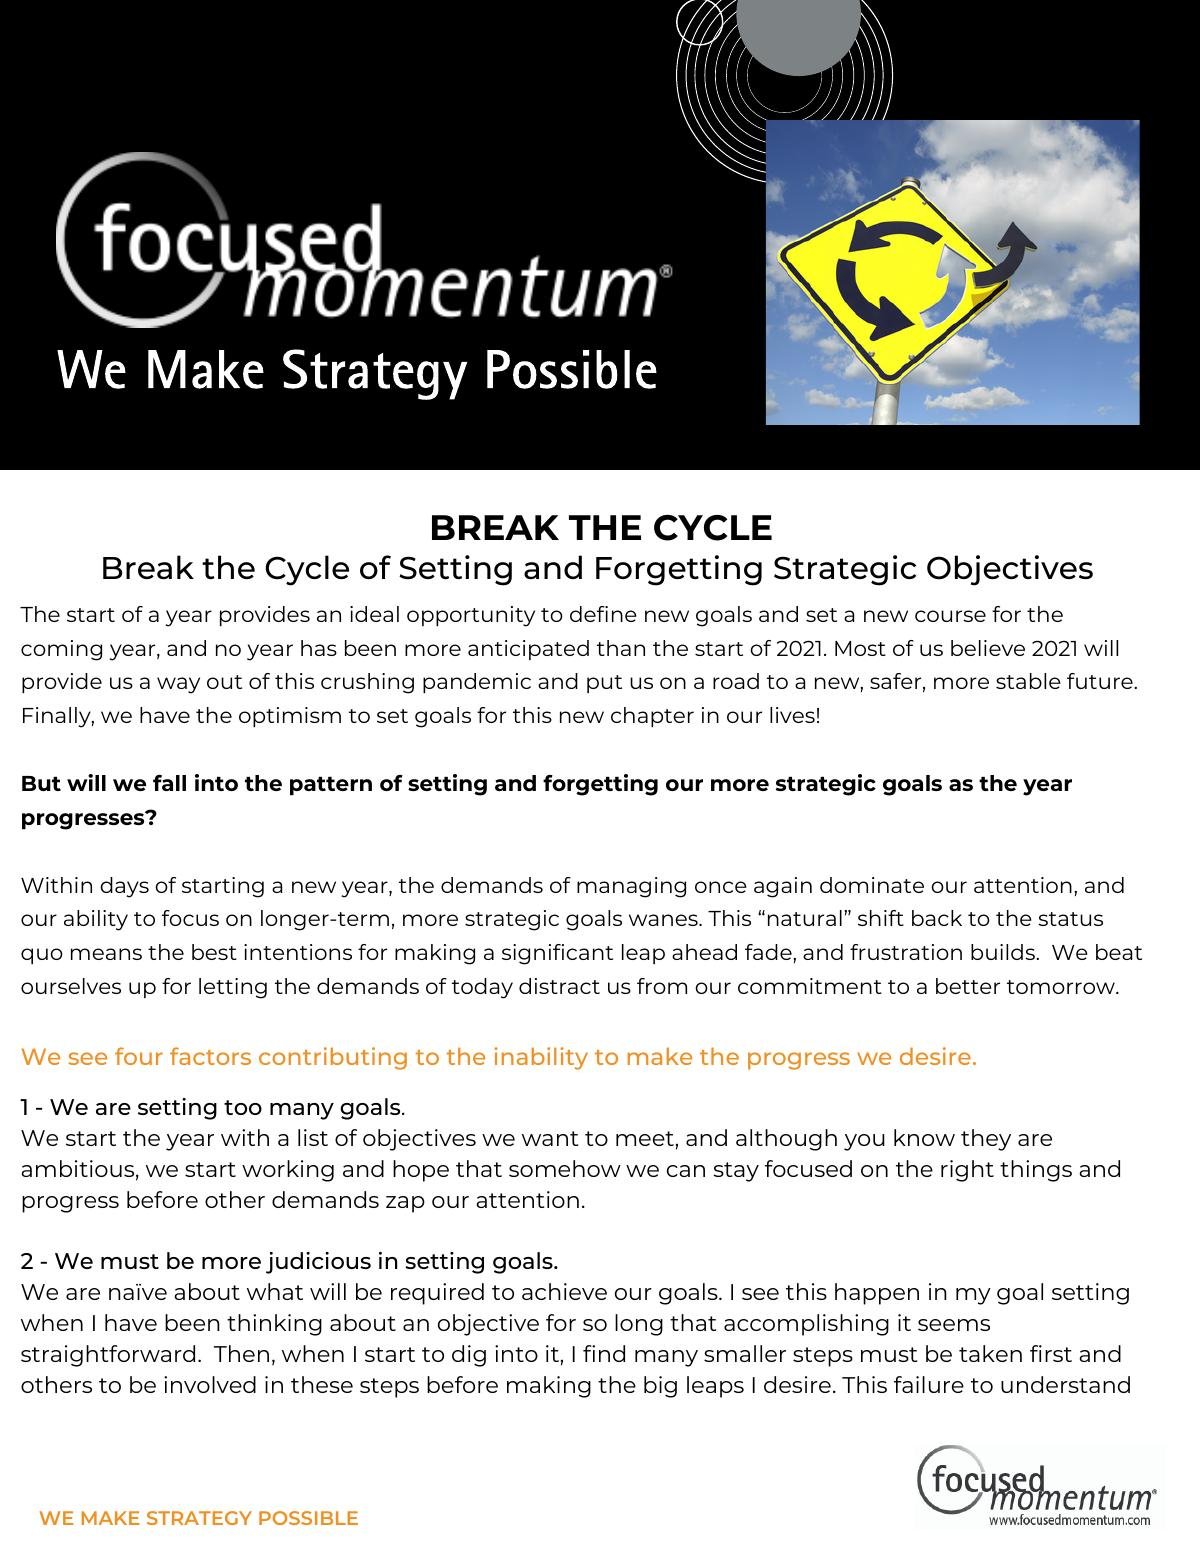 Break the Cycle of Setting and Forgetting Strategic Objectives